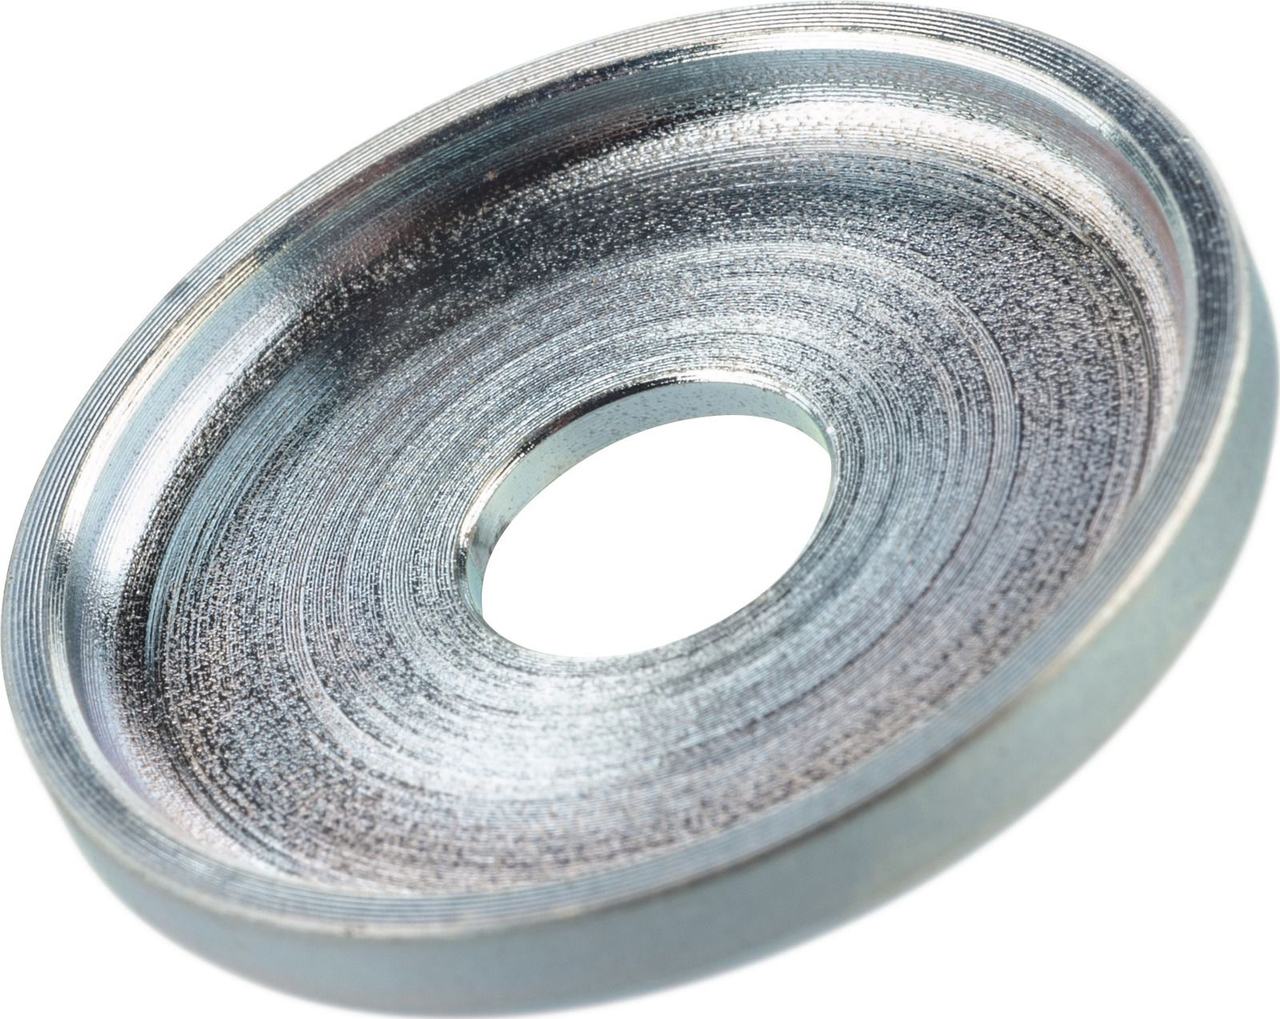 Washer, zinc-plated, dished, 1 piece XT500, TT500, for rear fuel tank mounting OEM reference # 90209-08097